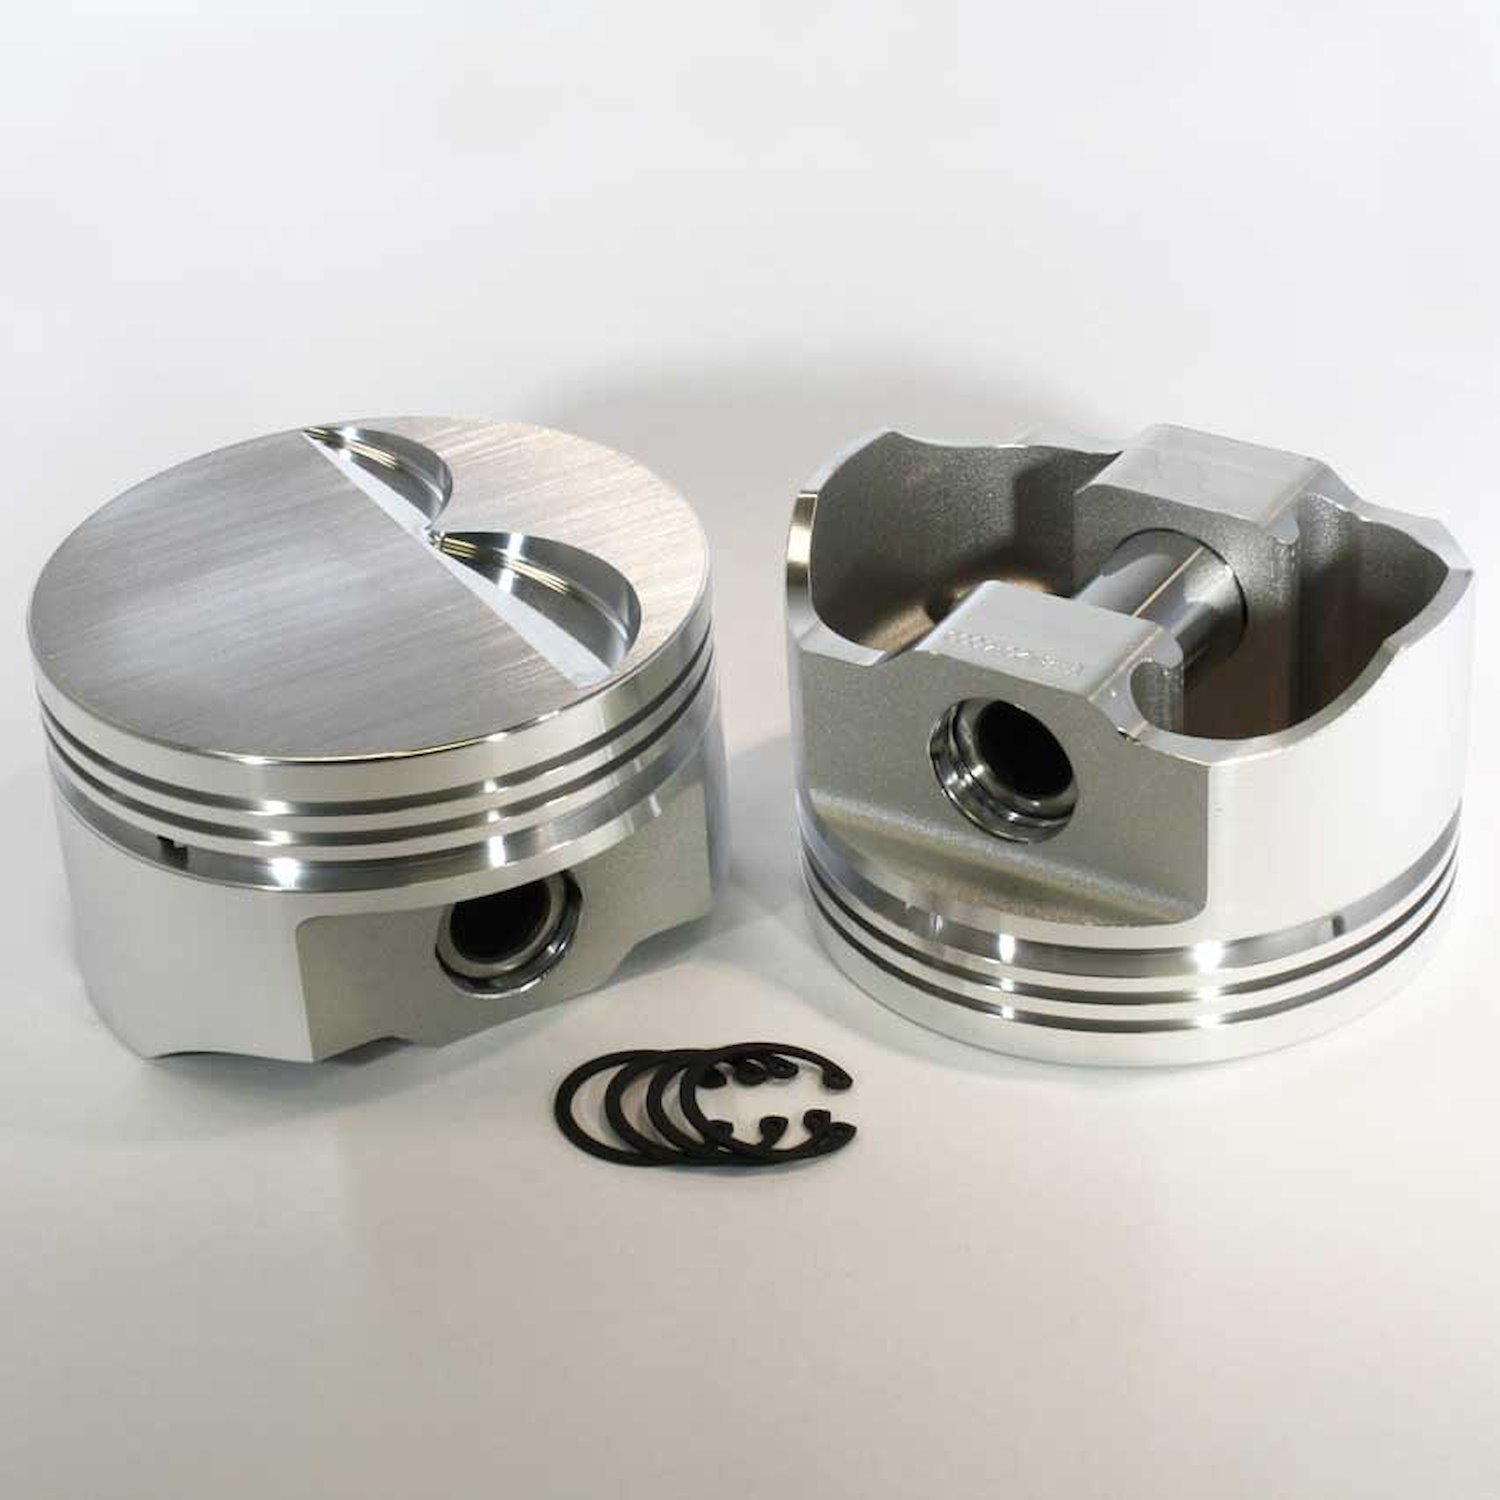 8785-4065 E-Series Flat Top Piston Set for 1999-2019 Chevy LS, 4.065 in. Bore, -3cc Volume [OEM Stroke]